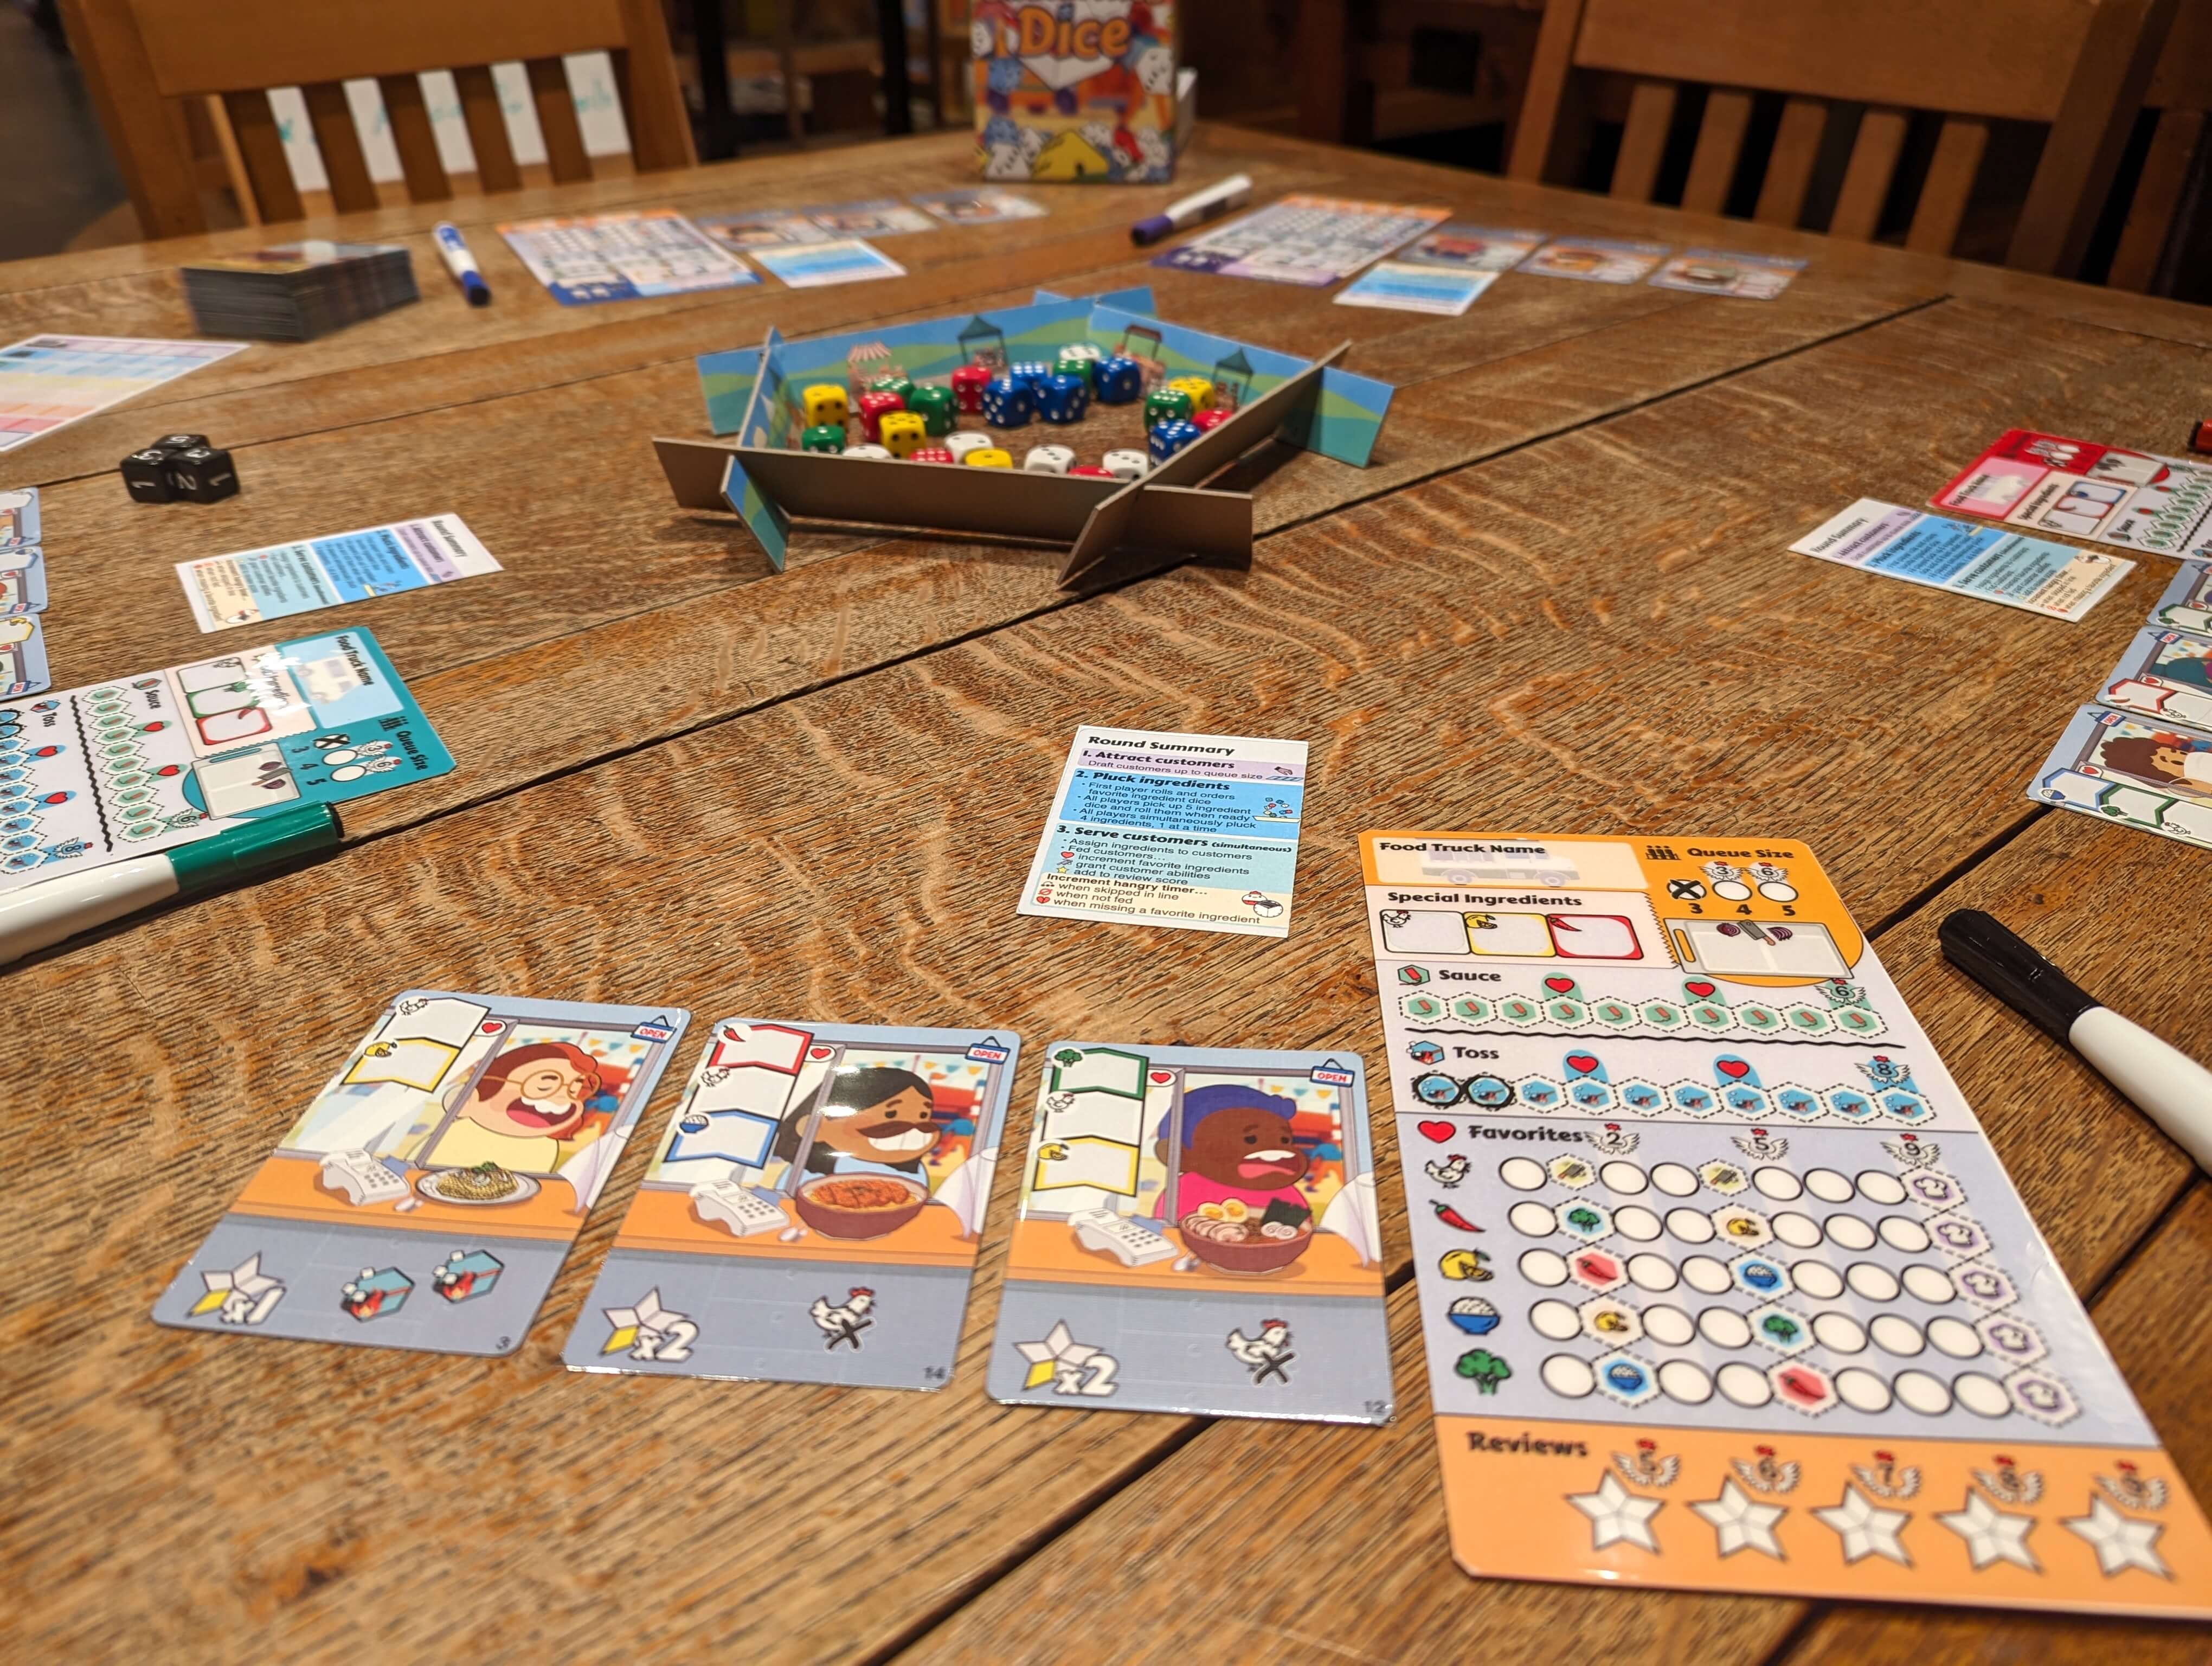 View of the game setup on the table